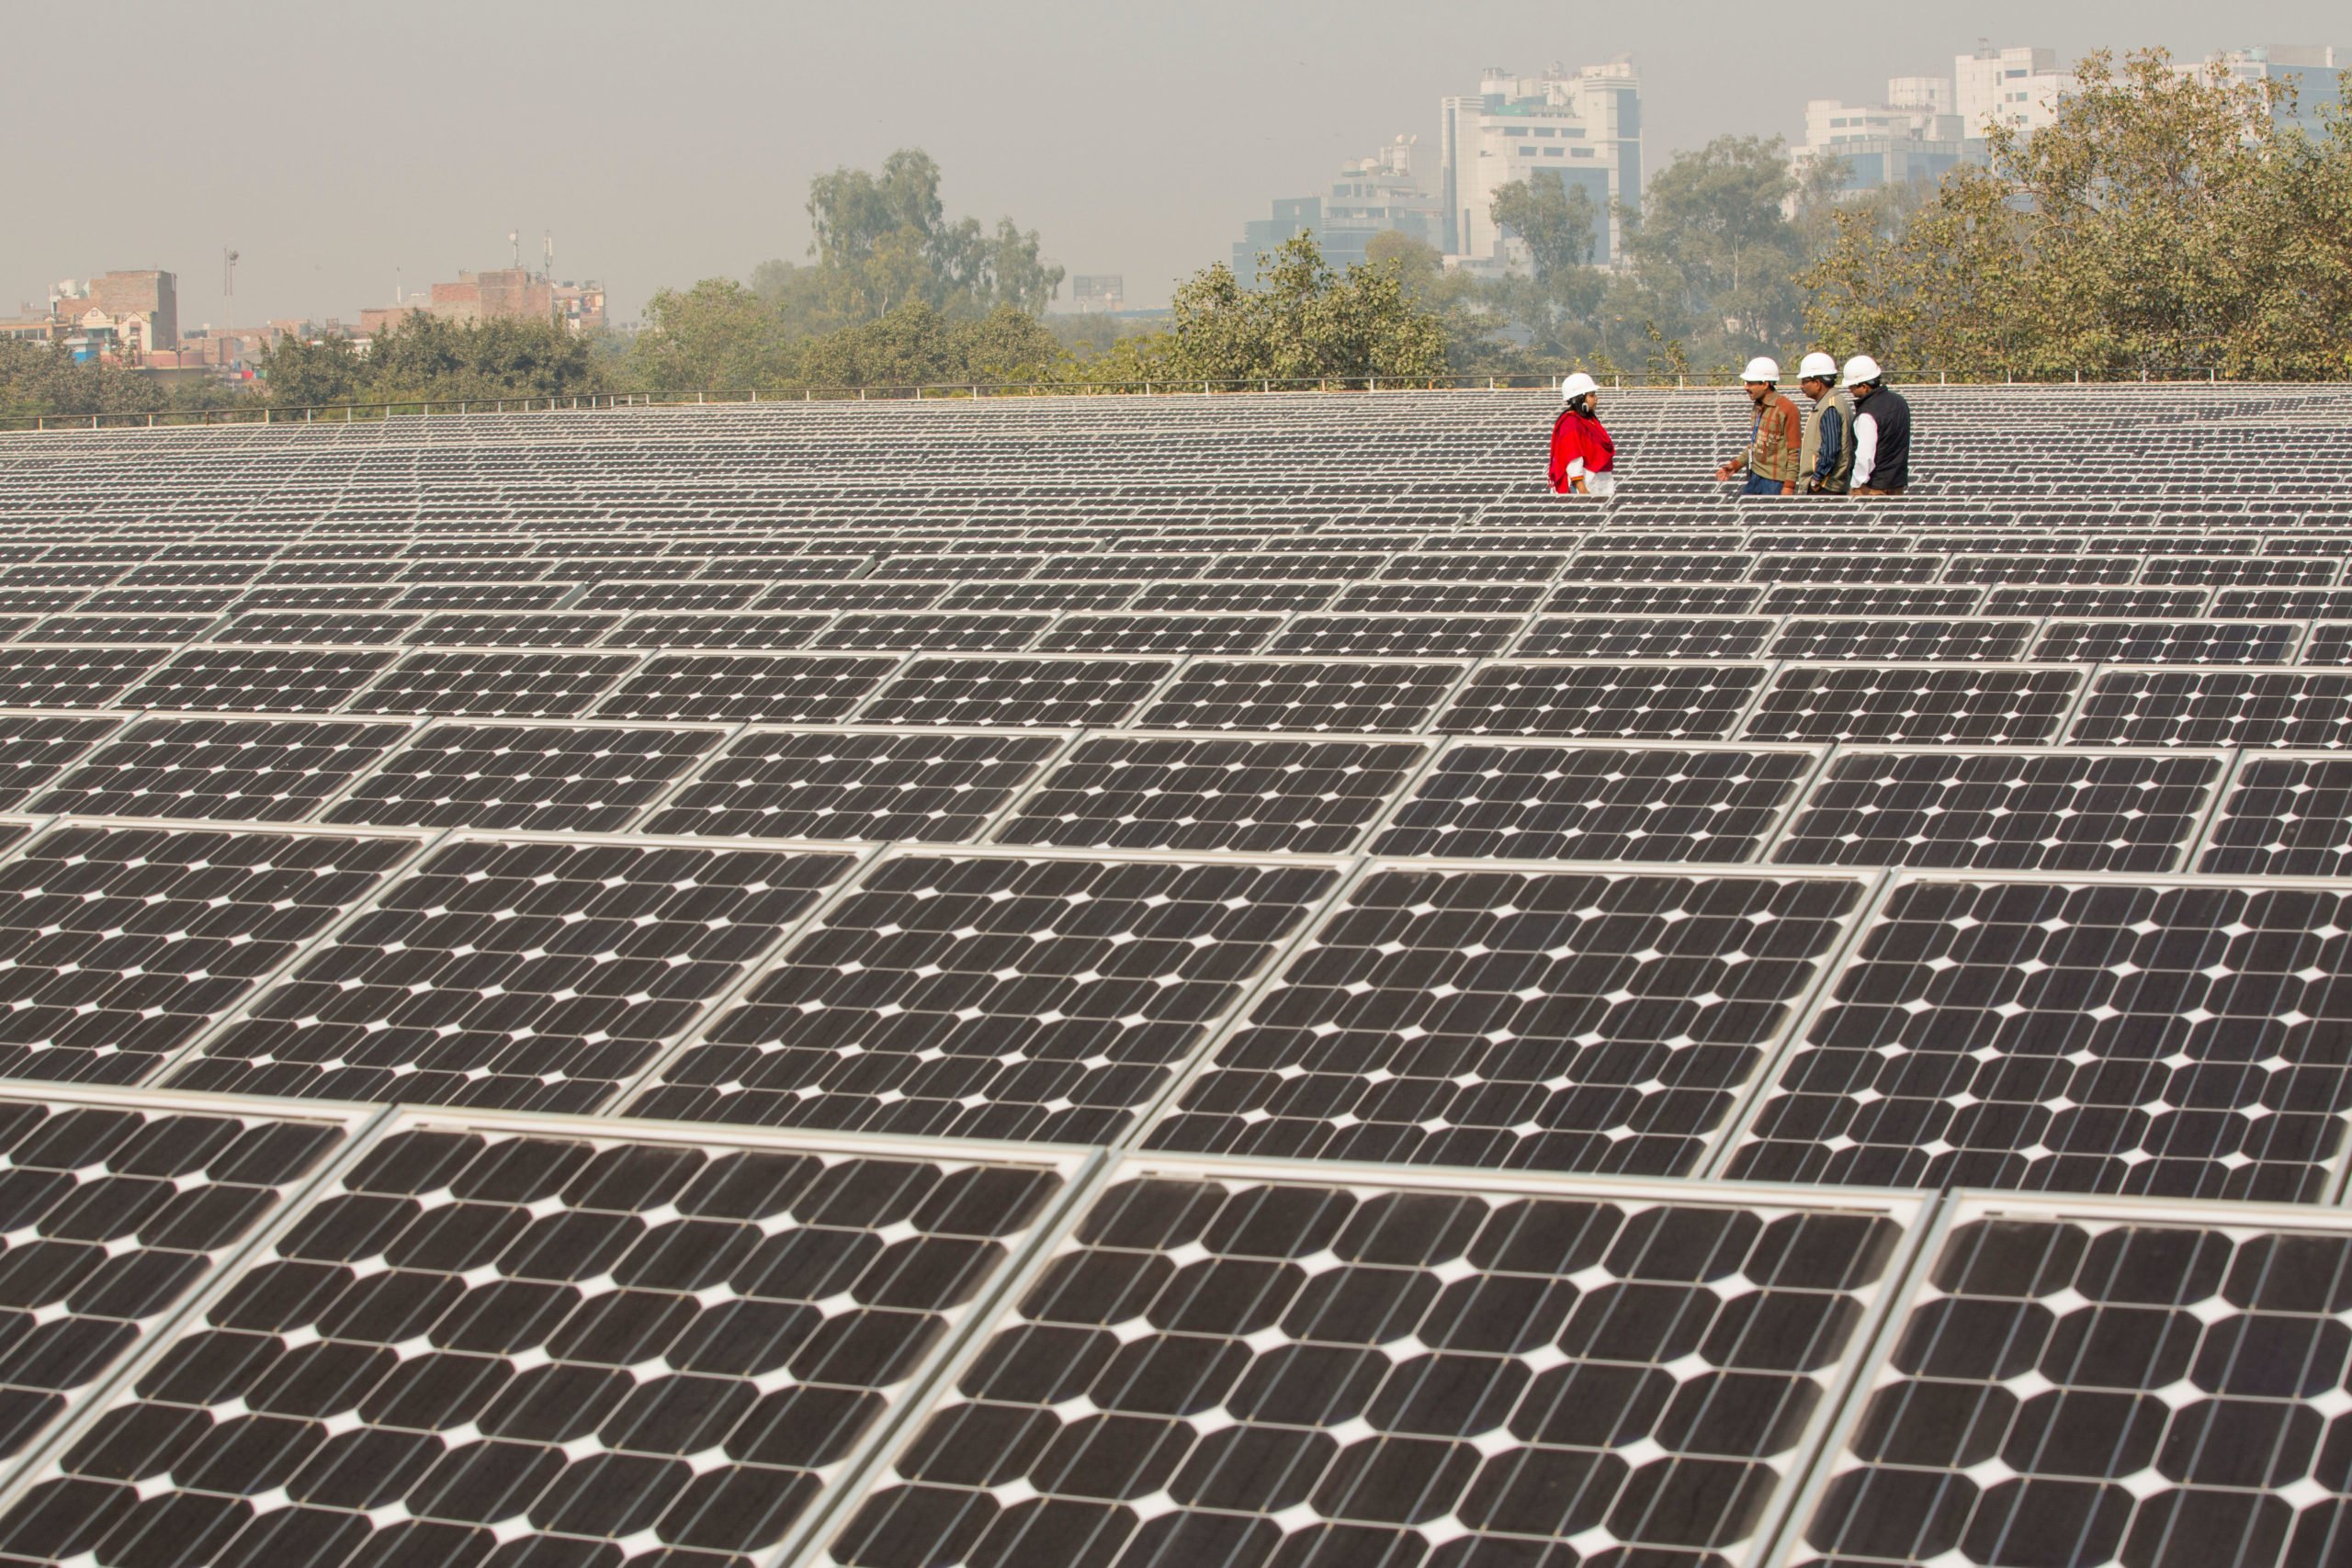 <p>A 1 MW solar power station in Delhi, India. Solar will be an essential part of India’s plans to implement the net zero by 2070 target. (Image: Ashley Cooper pics / Alamy)</p>